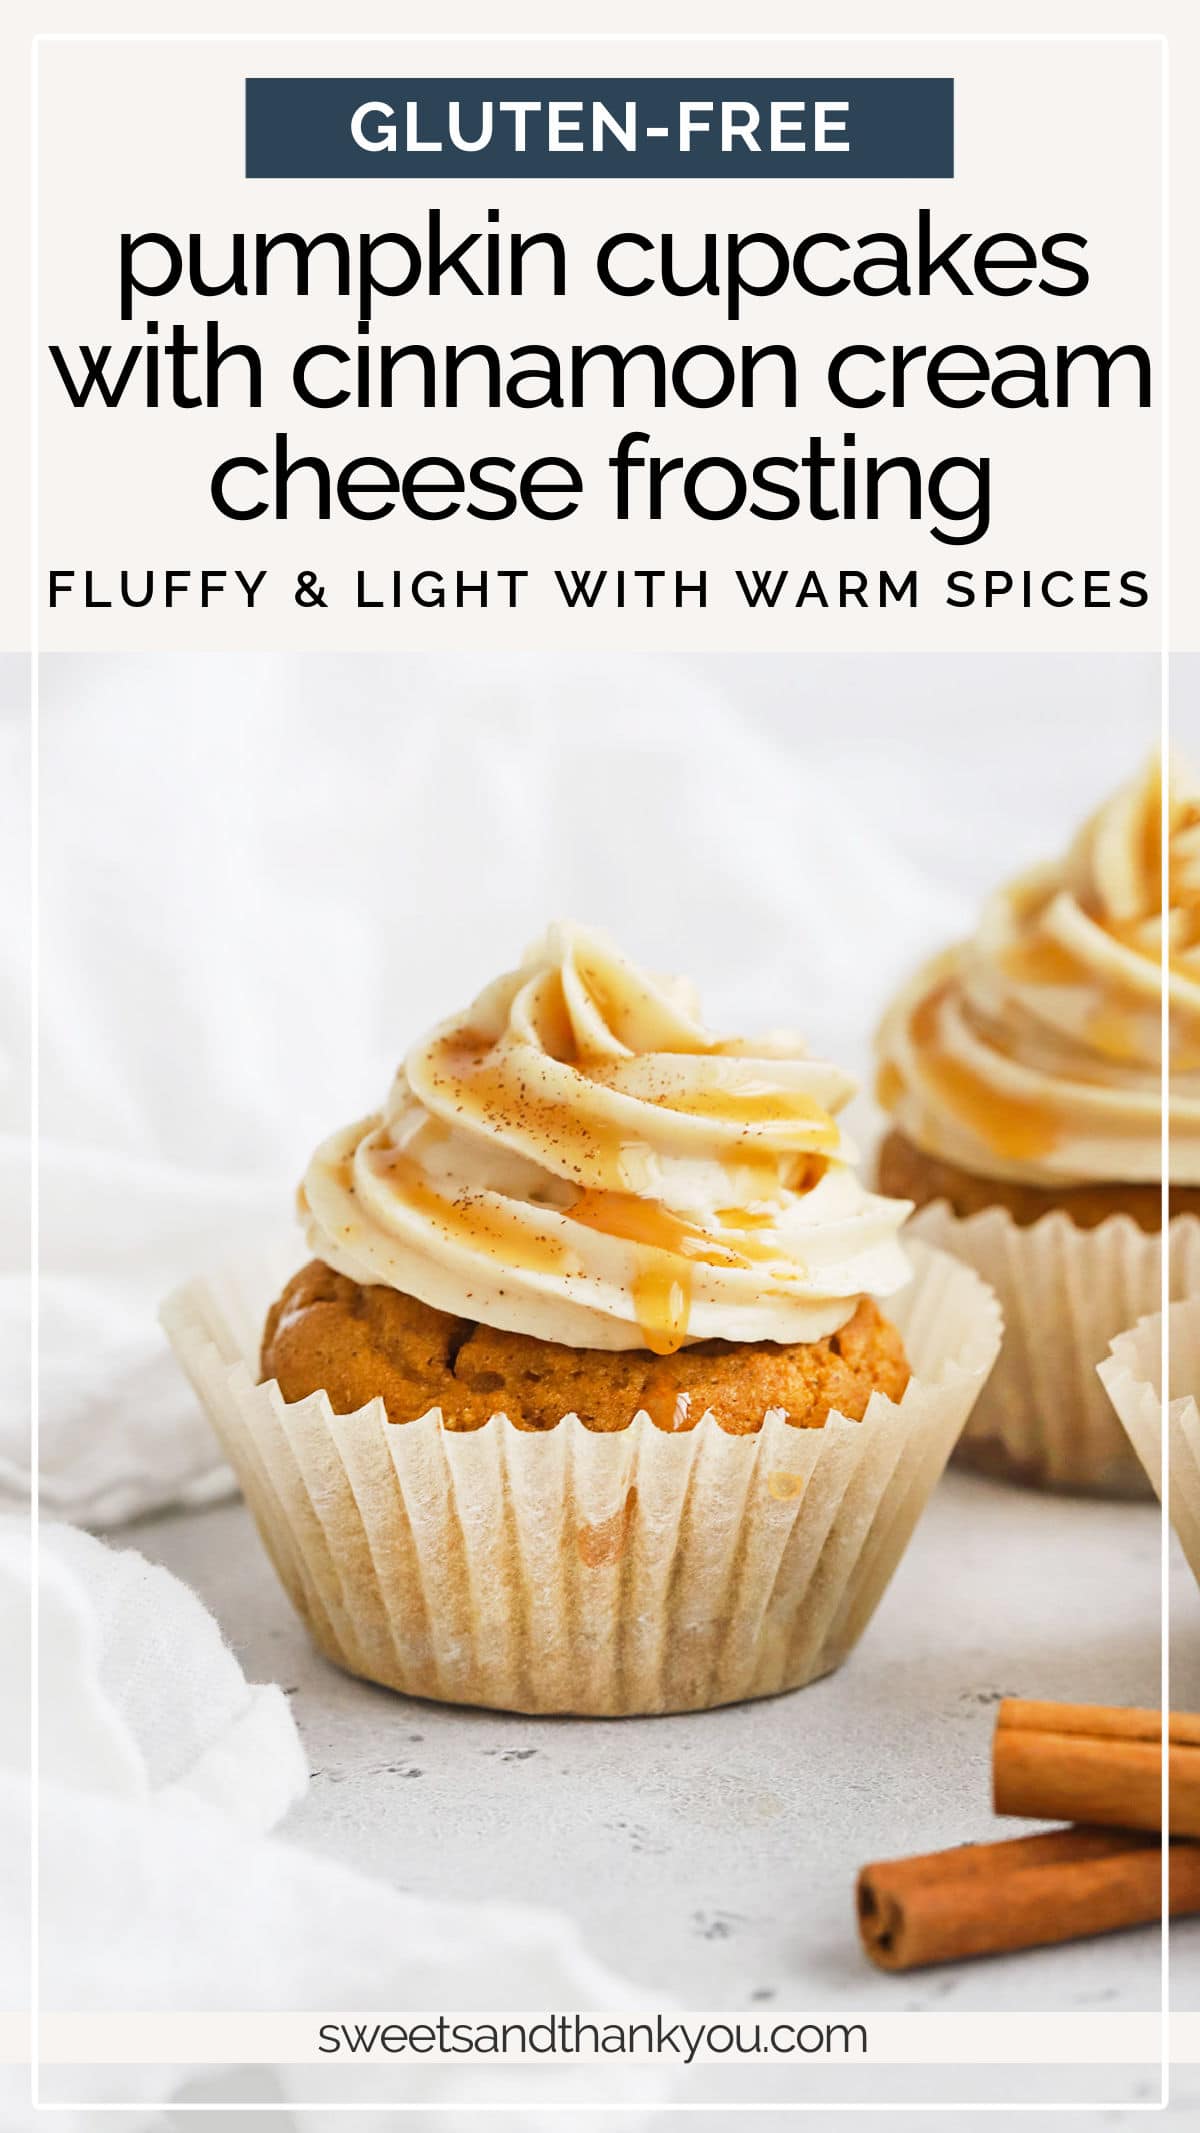 Gluten-Free Pumpkin Cupcakes With Cinnamon Cream Cheese Frosting - My favorite gluten-free pumpkin cupcake recipe with warm spices and a frosting you'll love! // Gluten-Free cupcakes // gluten free pumpkin cake // cinnamon cream cheese frosting recipe // #glutenfree #cupcakes #pumpkincupcakes #glutenfreepumpkin #glutenfreecake #glutenfreebaking